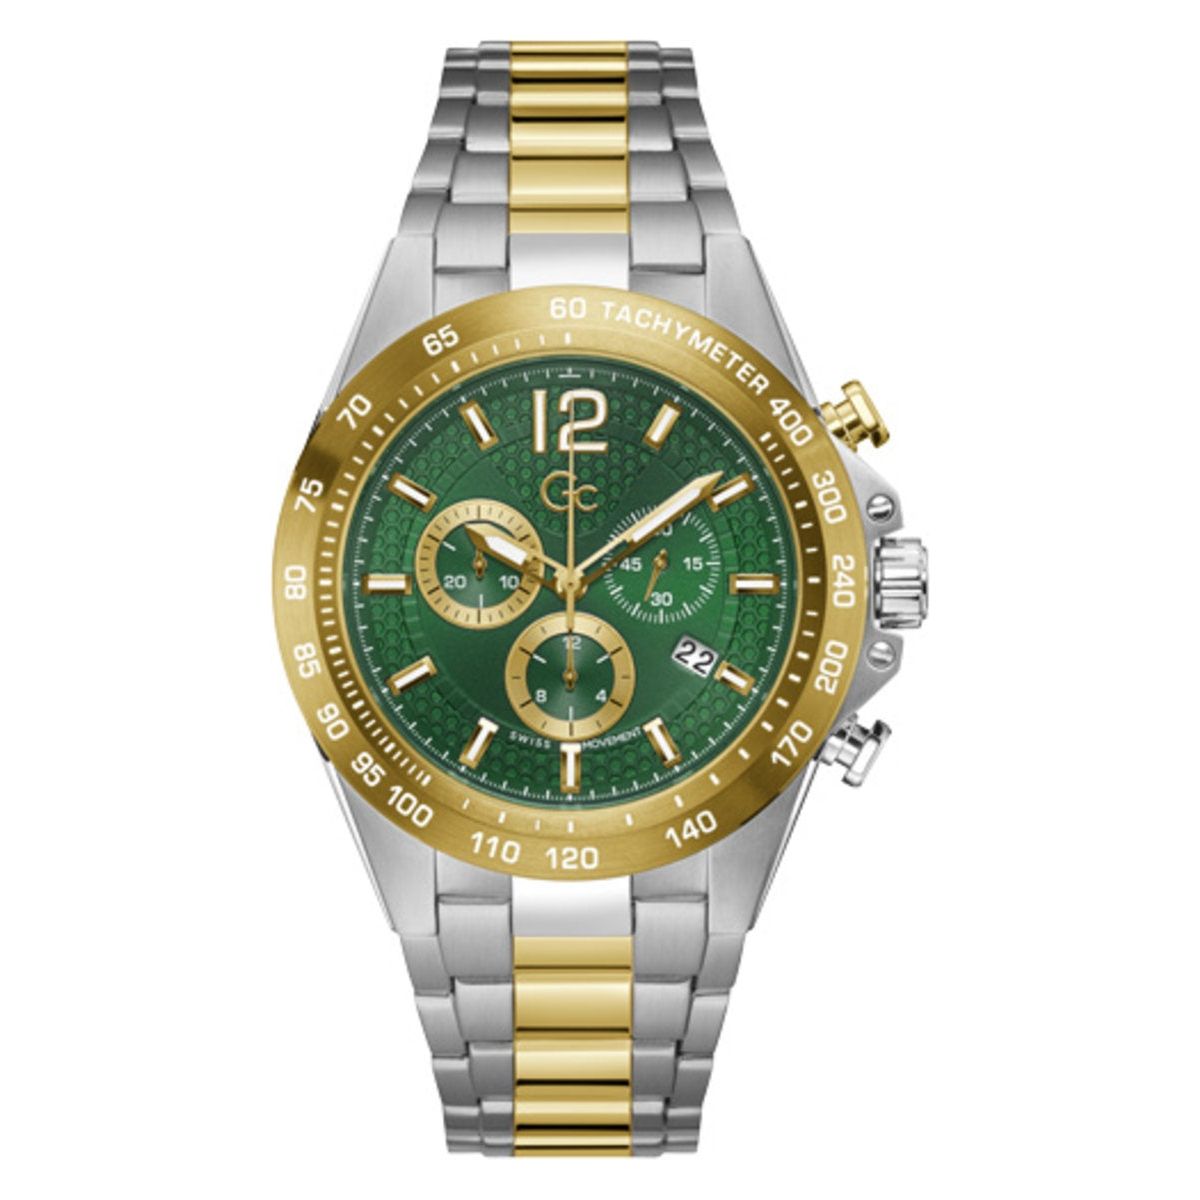 GUESS COLLECTION GUESS COLLECTION WATCHES Mod. Z07008G9MF WATCHES guess-collection-watches-mod-z07008g9mf